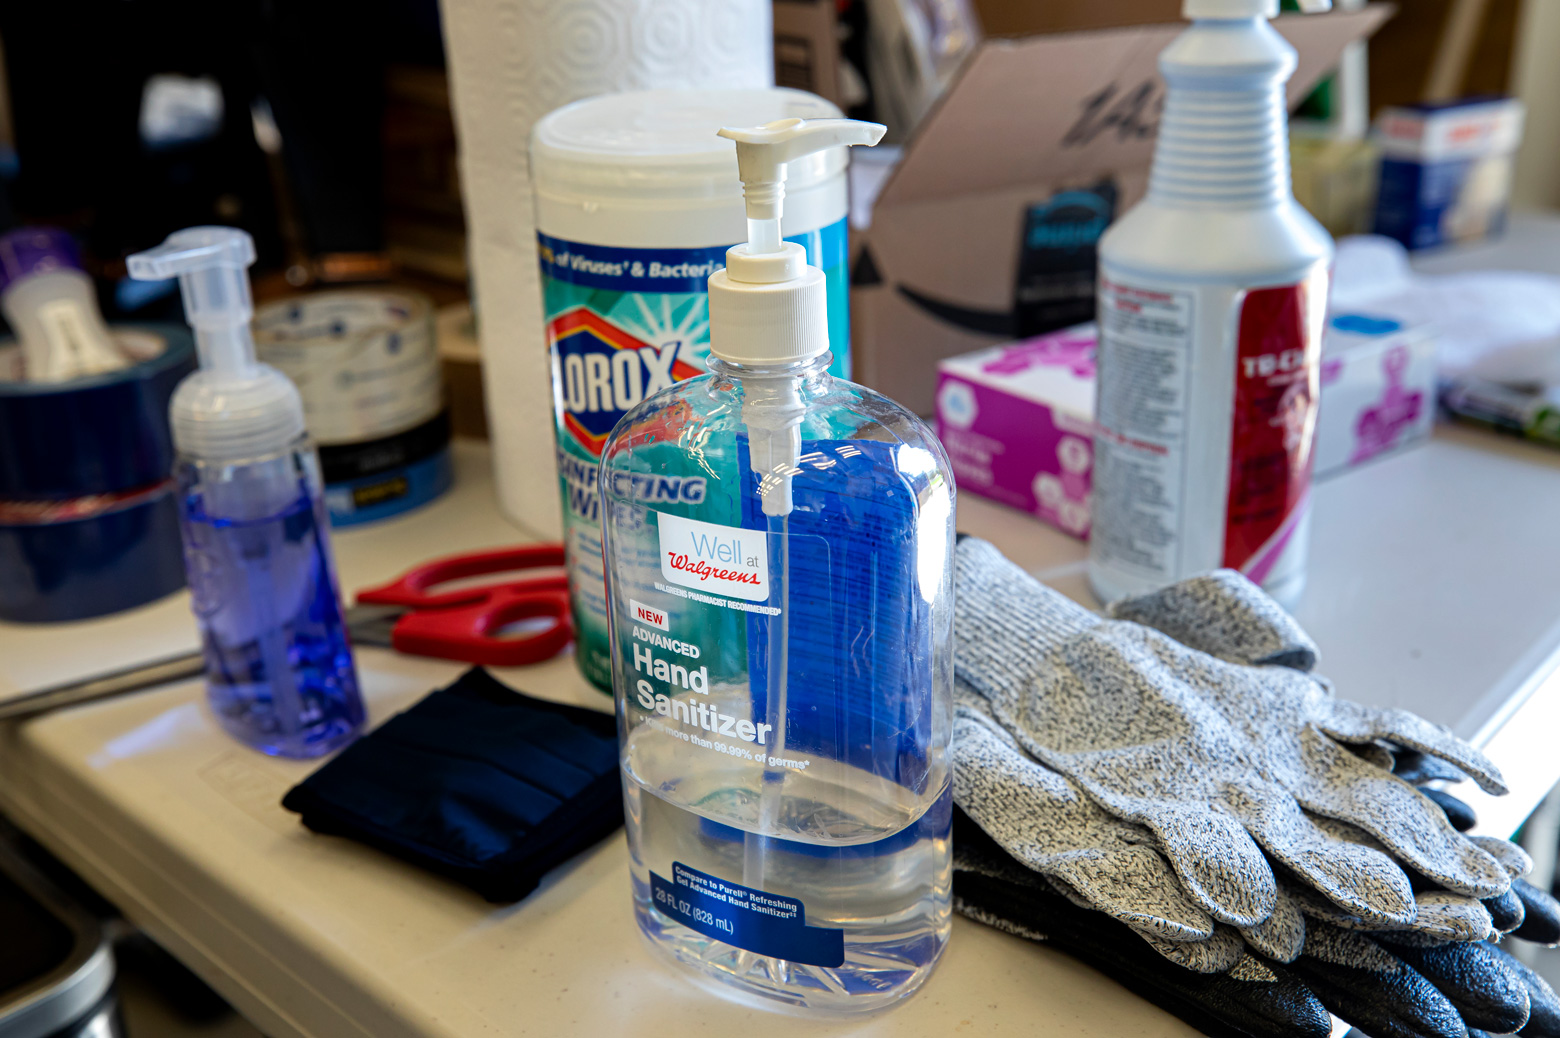 Hand sanitizer and other cleaning products in the lab of Jessy Grizzle, the Director of the Robotics Institute, on North Campus of the University of Michigan in Ann Arbor, MI on May 26, 2020.